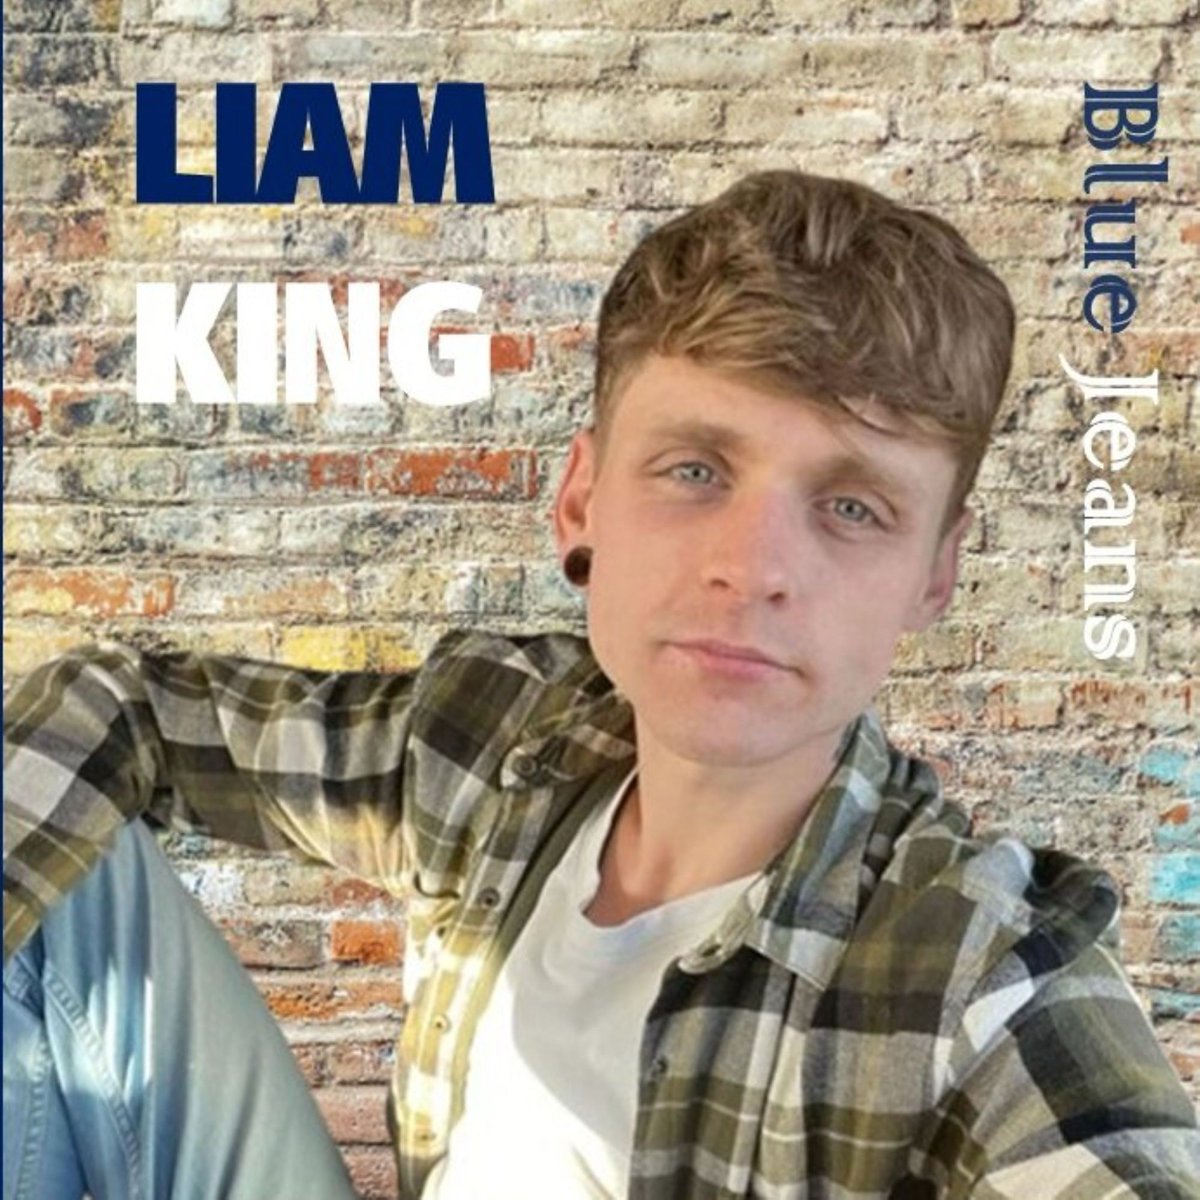 🎤🎶 We’ve got a very special guest joining us on the Tring Today show at noon! Liam King is a singer from Aylesbury and he’ll be chatting to Kate about the release of his first single. Join us live! #herts #bucks #beds #localradio #tringradio #music #hits #yourstation #news